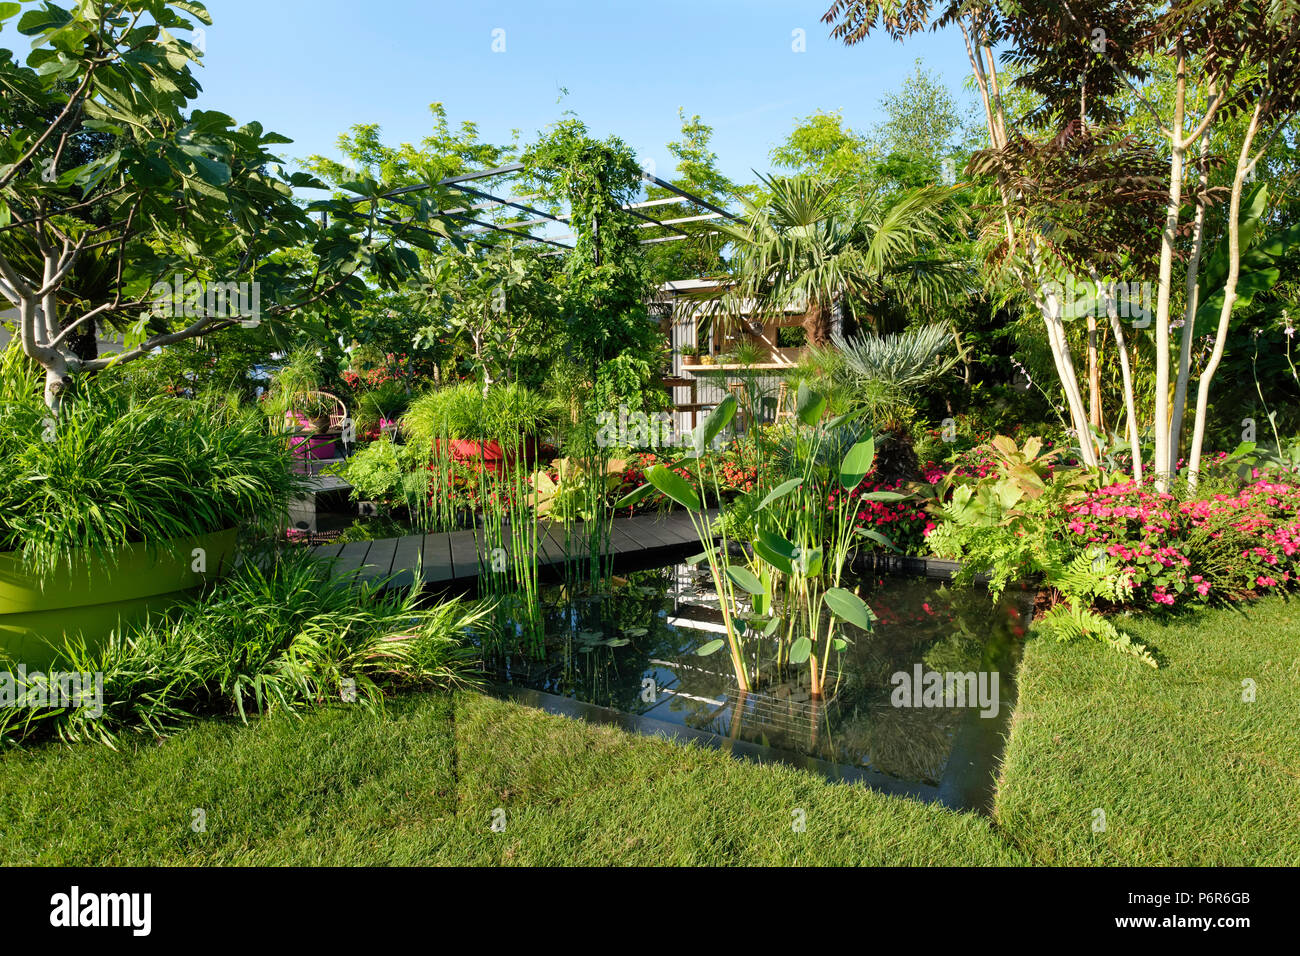 RHS Hampton Court Palace Flower Show, July 2, 2018. The B&Q Bursting Busy Lizzie Garden designed by Mathew Childs. Credit P Tomlins/Alamy Live News Stock Photo